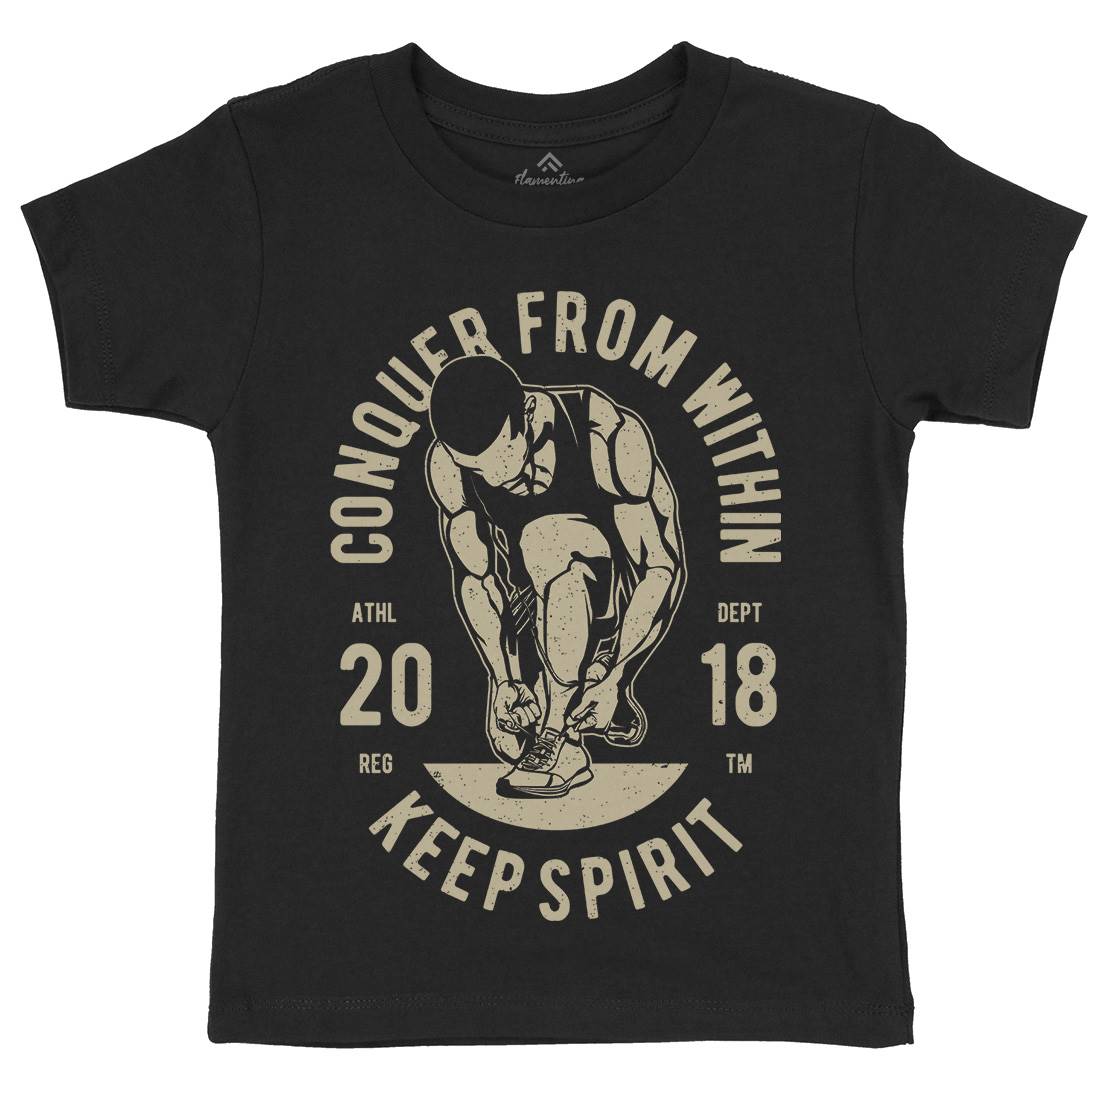 Conquer From Within Kids Crew Neck T-Shirt Sport A638